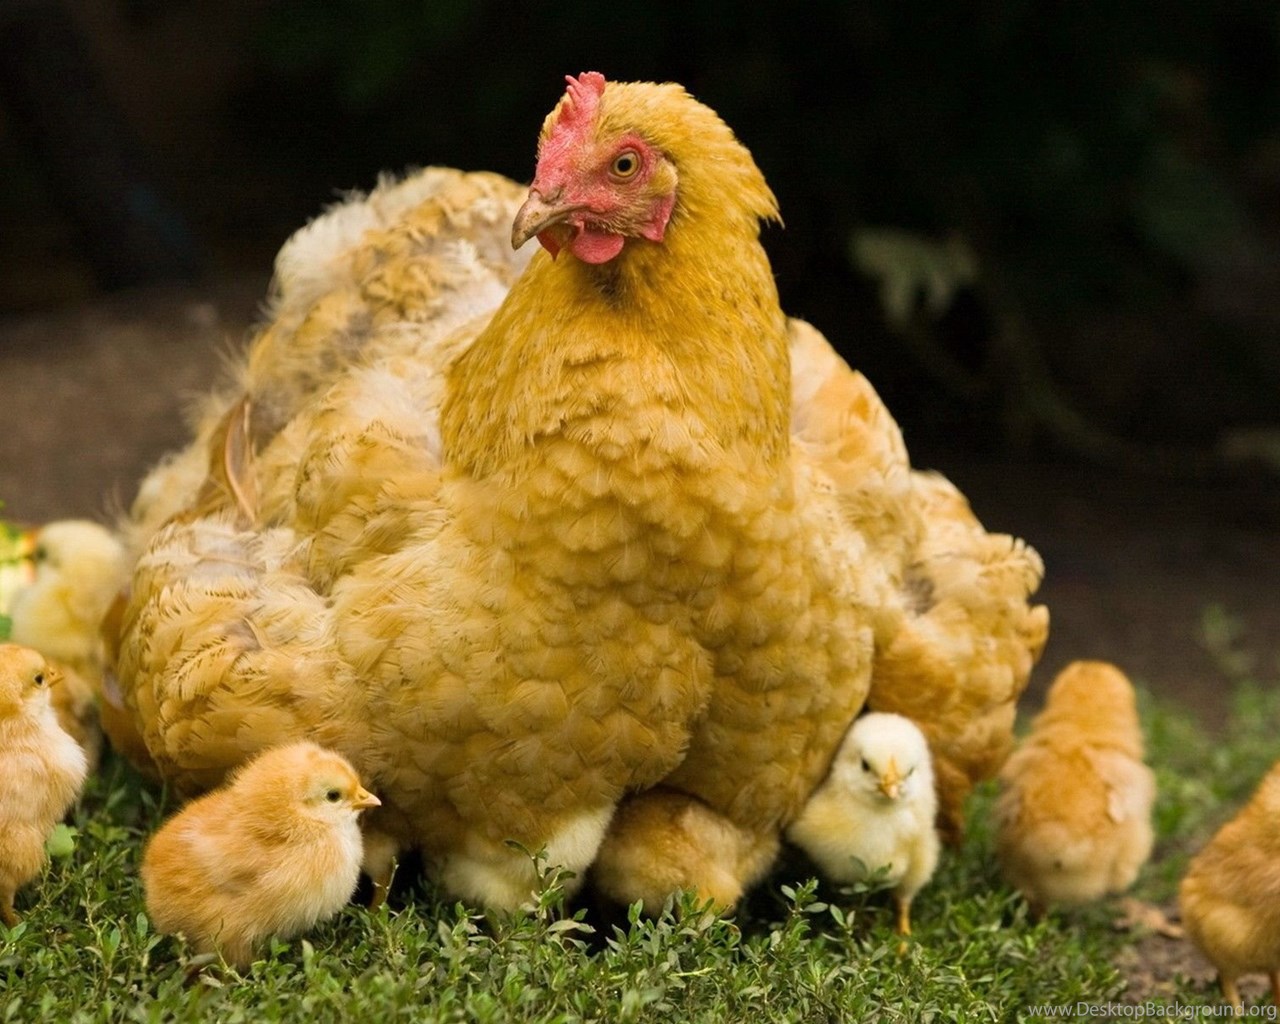 Pics, Facts, Funny Stuff About Animals & Nature Chicken Wallpaper Desktop Background